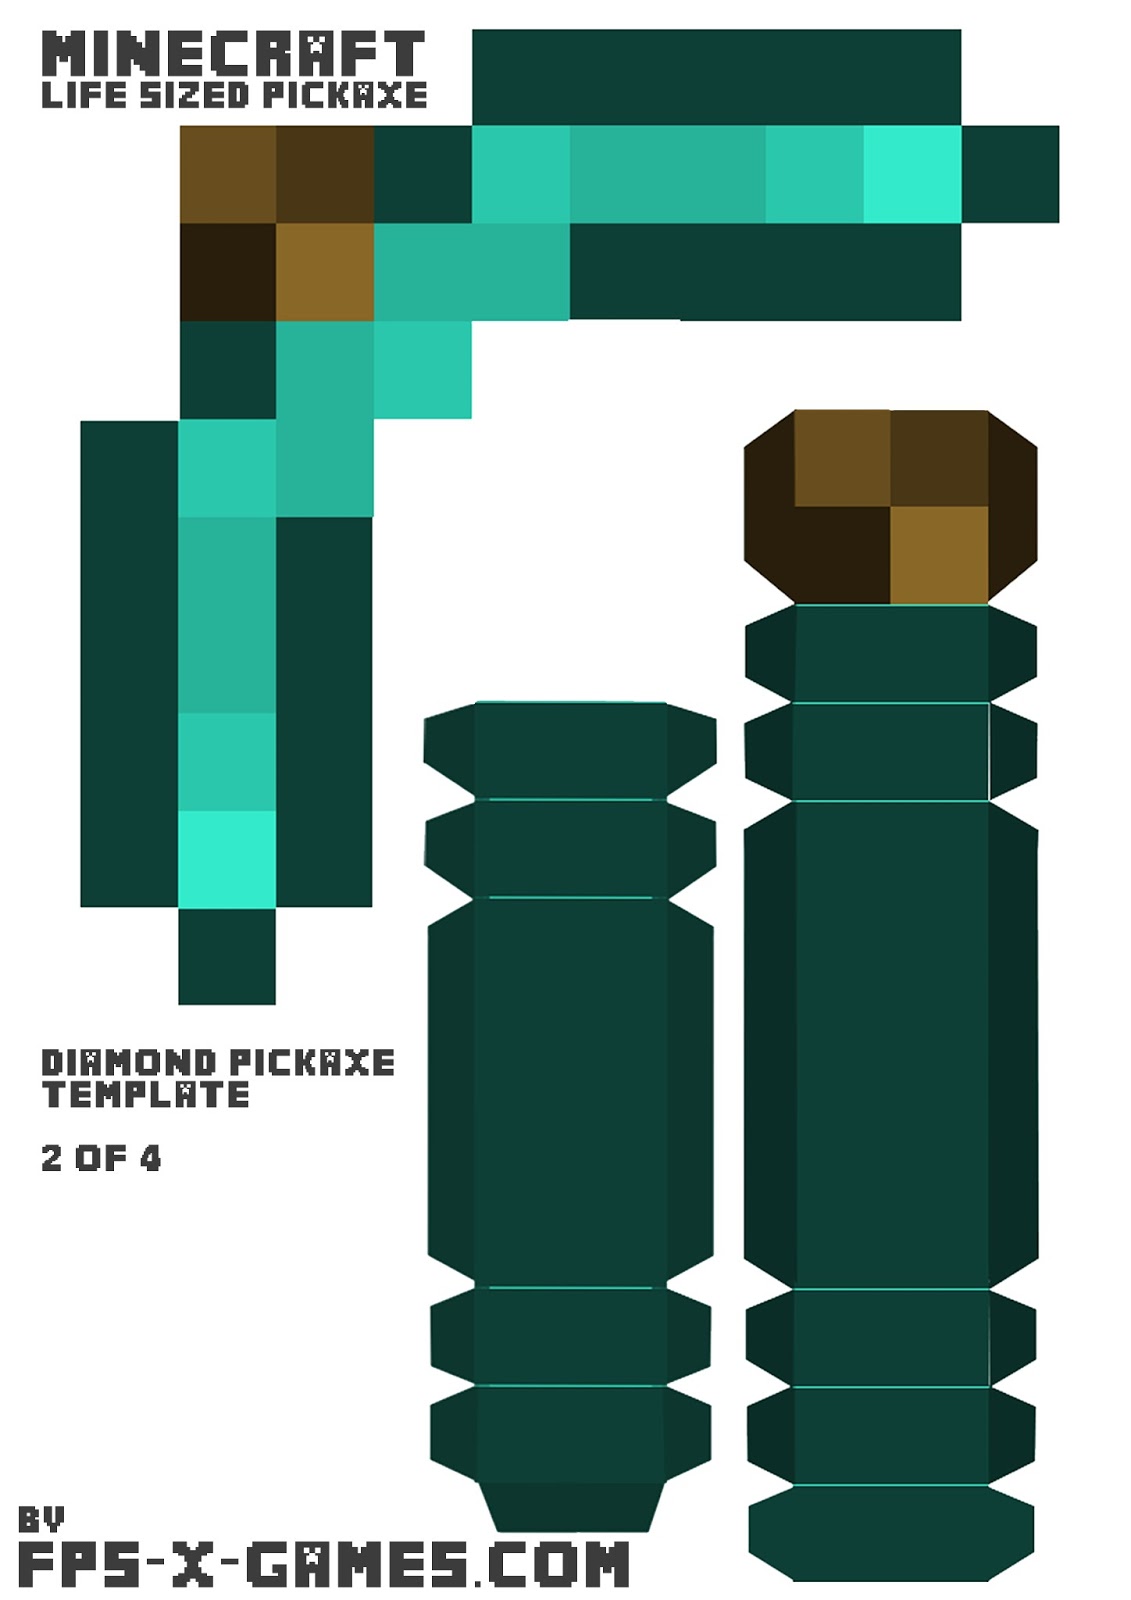 Template Minecraft minecraft Diamond Cut Papercraft Free Life Pickaxe instructions creeper Out papercraft Sized